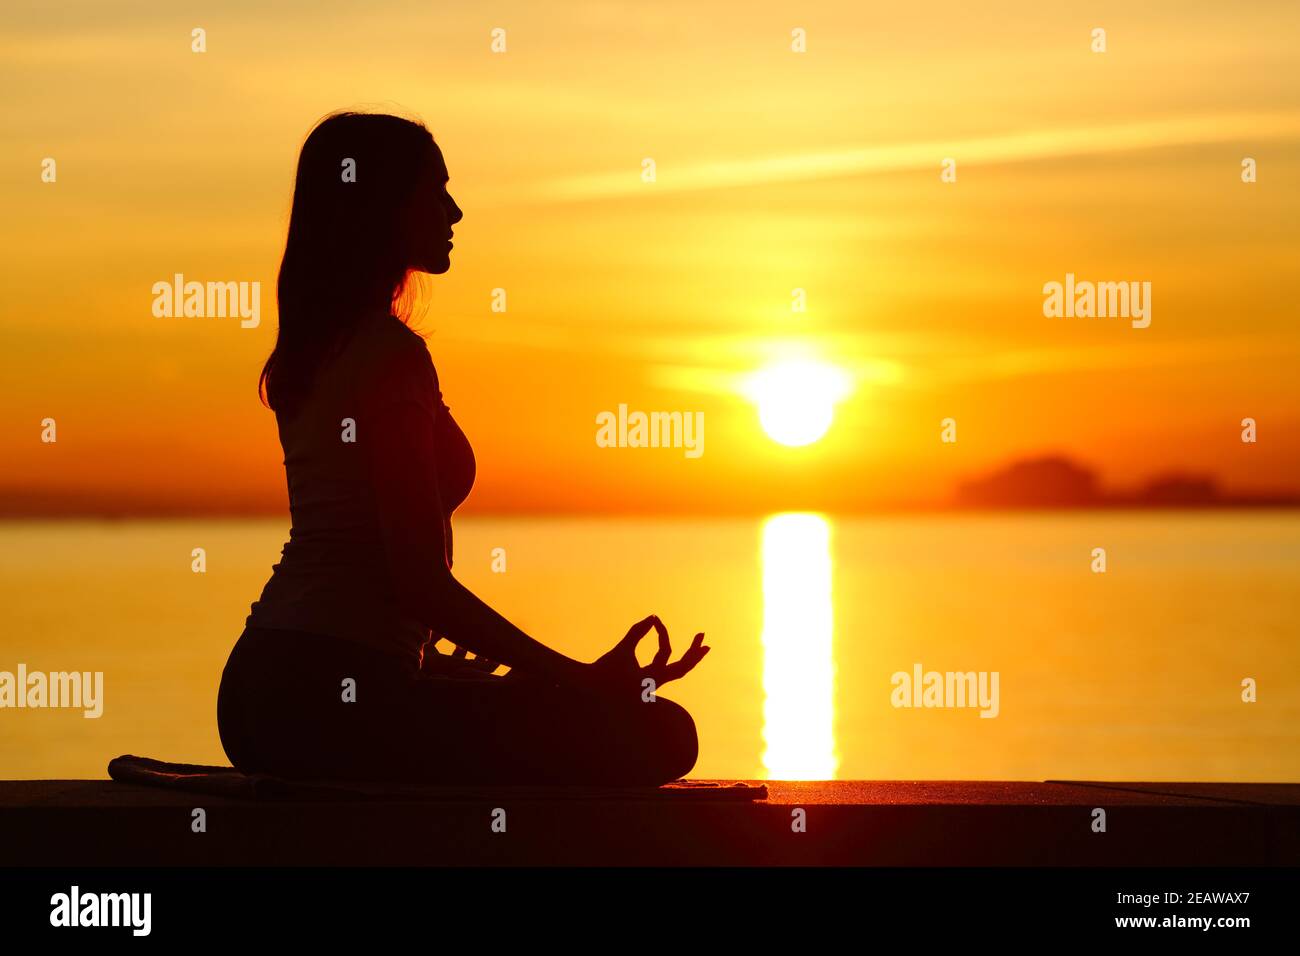 Silhouette of a woman doing yoga exercise at sunset Stock Photo